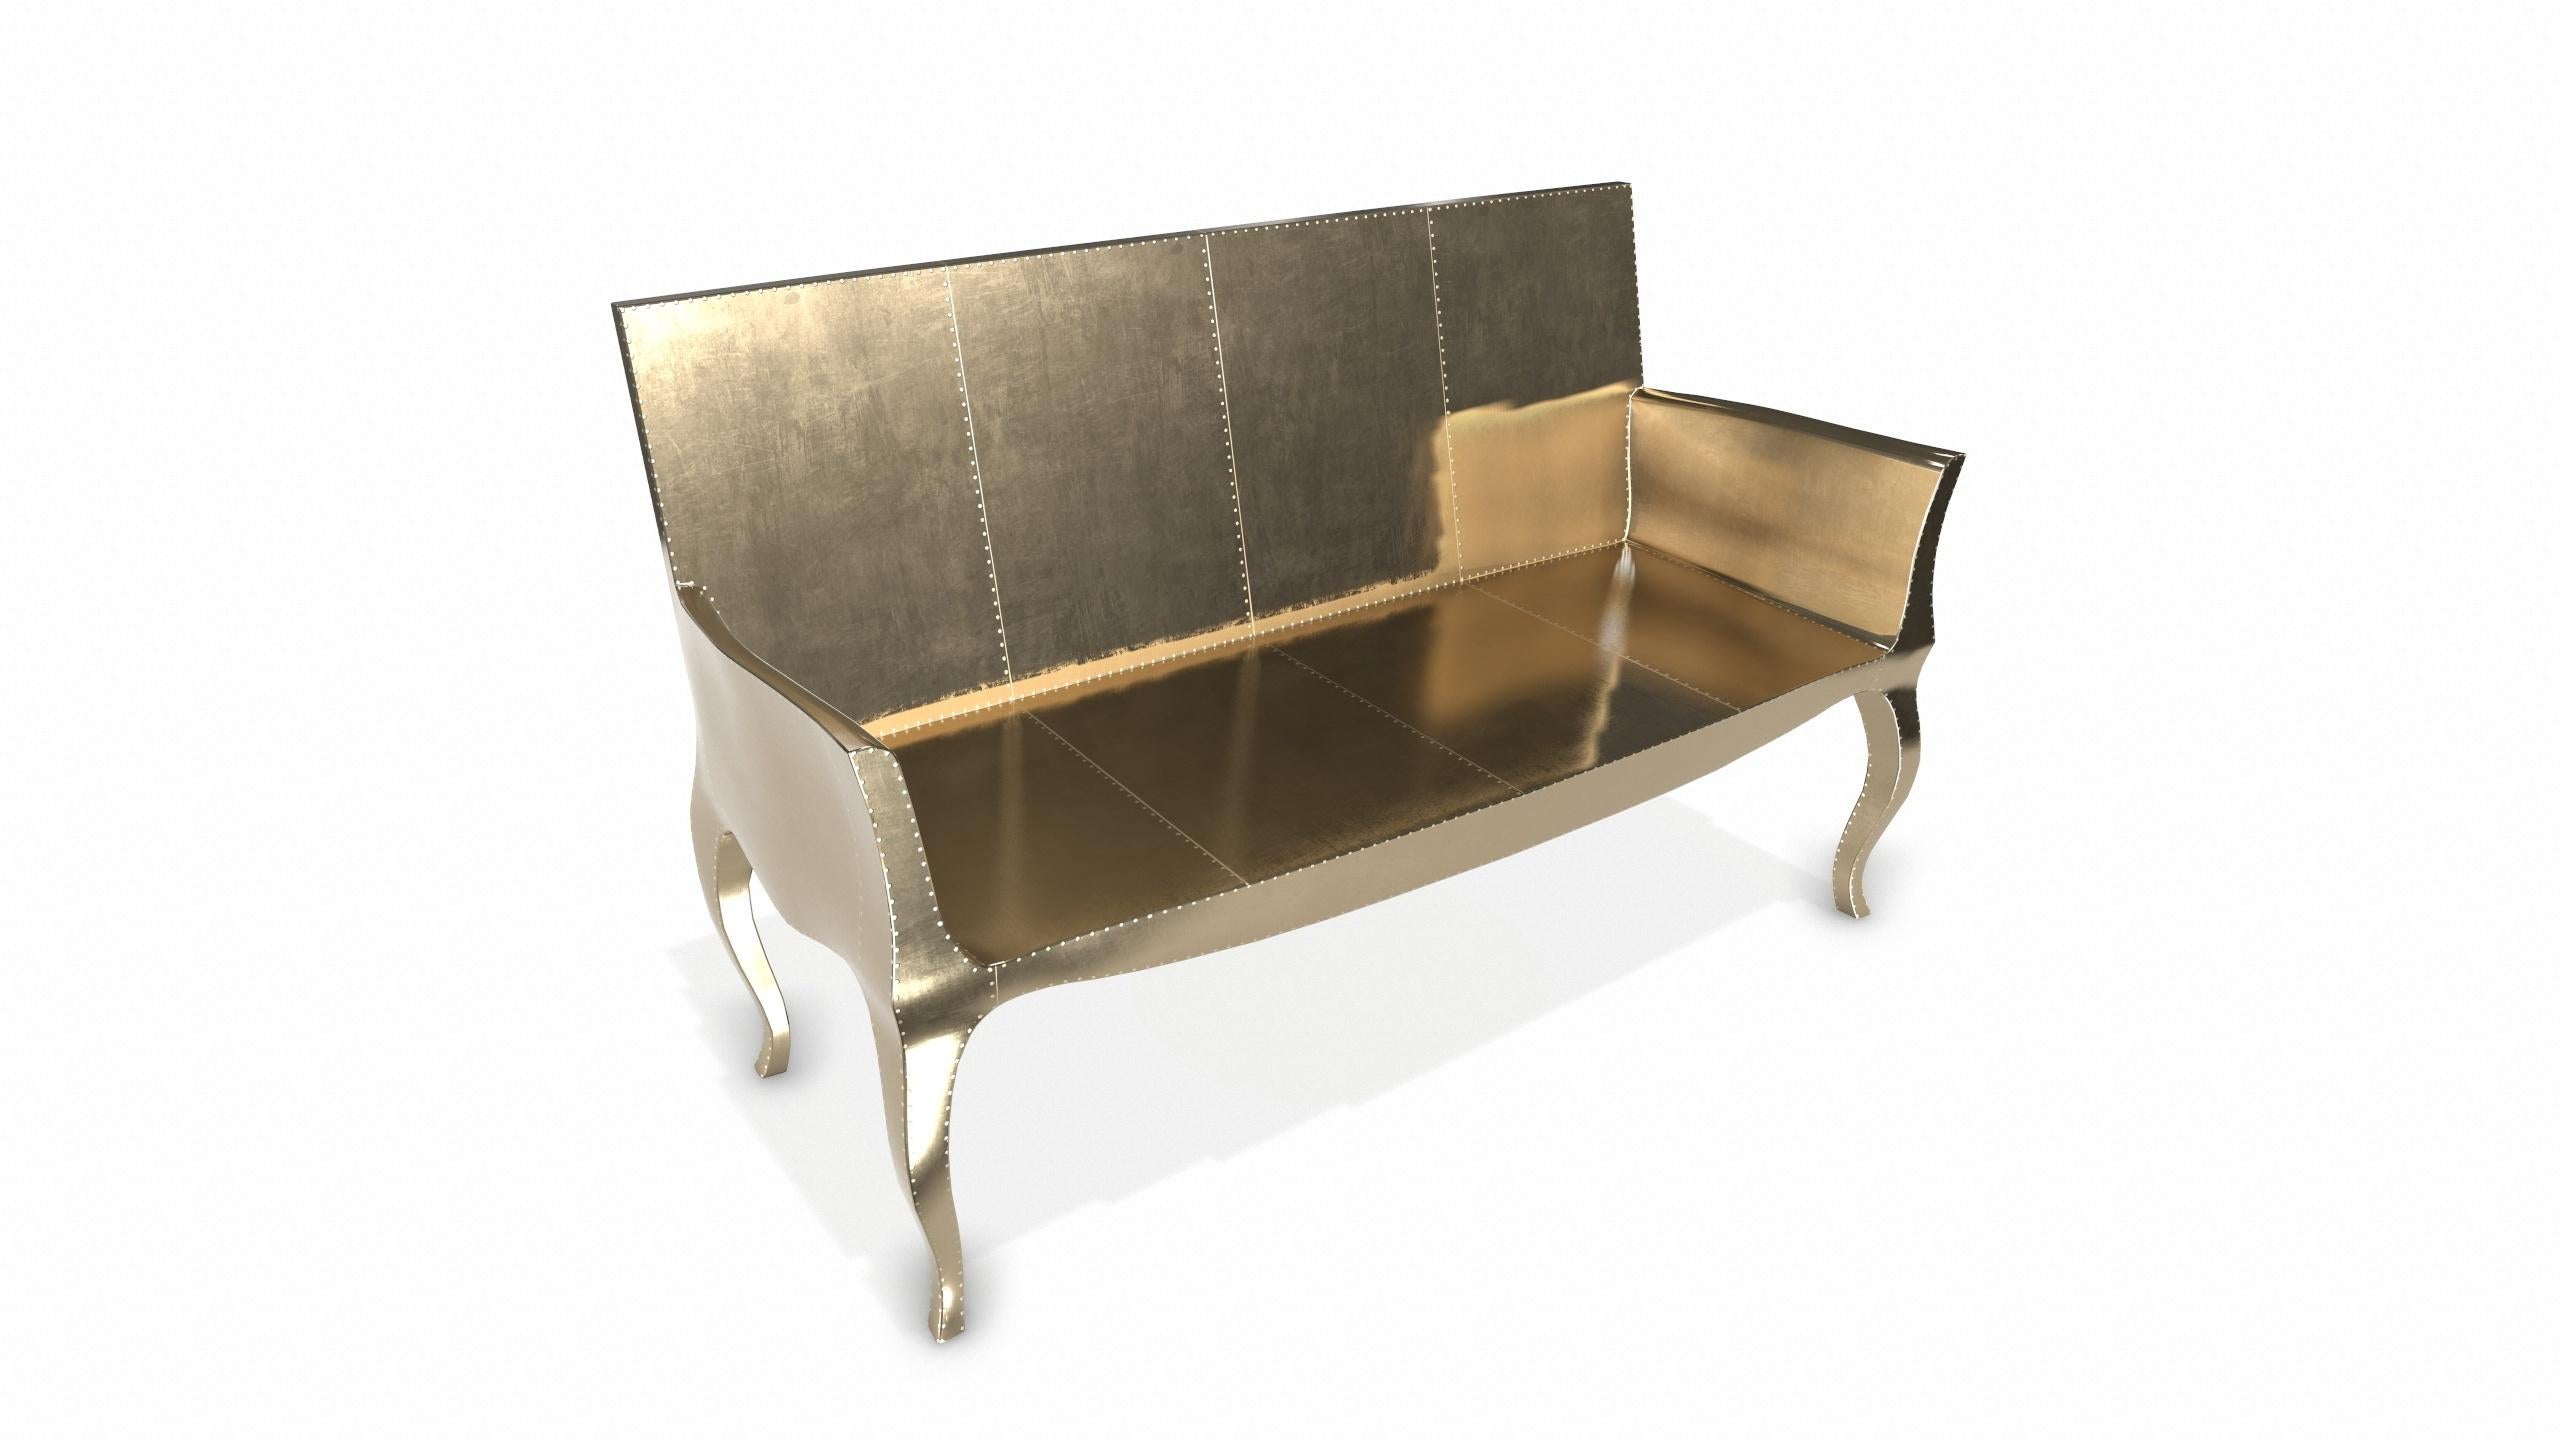 Louise Settee Art Deco Canapes in Smooth Brass by Paul Mathieu for S Odegard For Sale 2